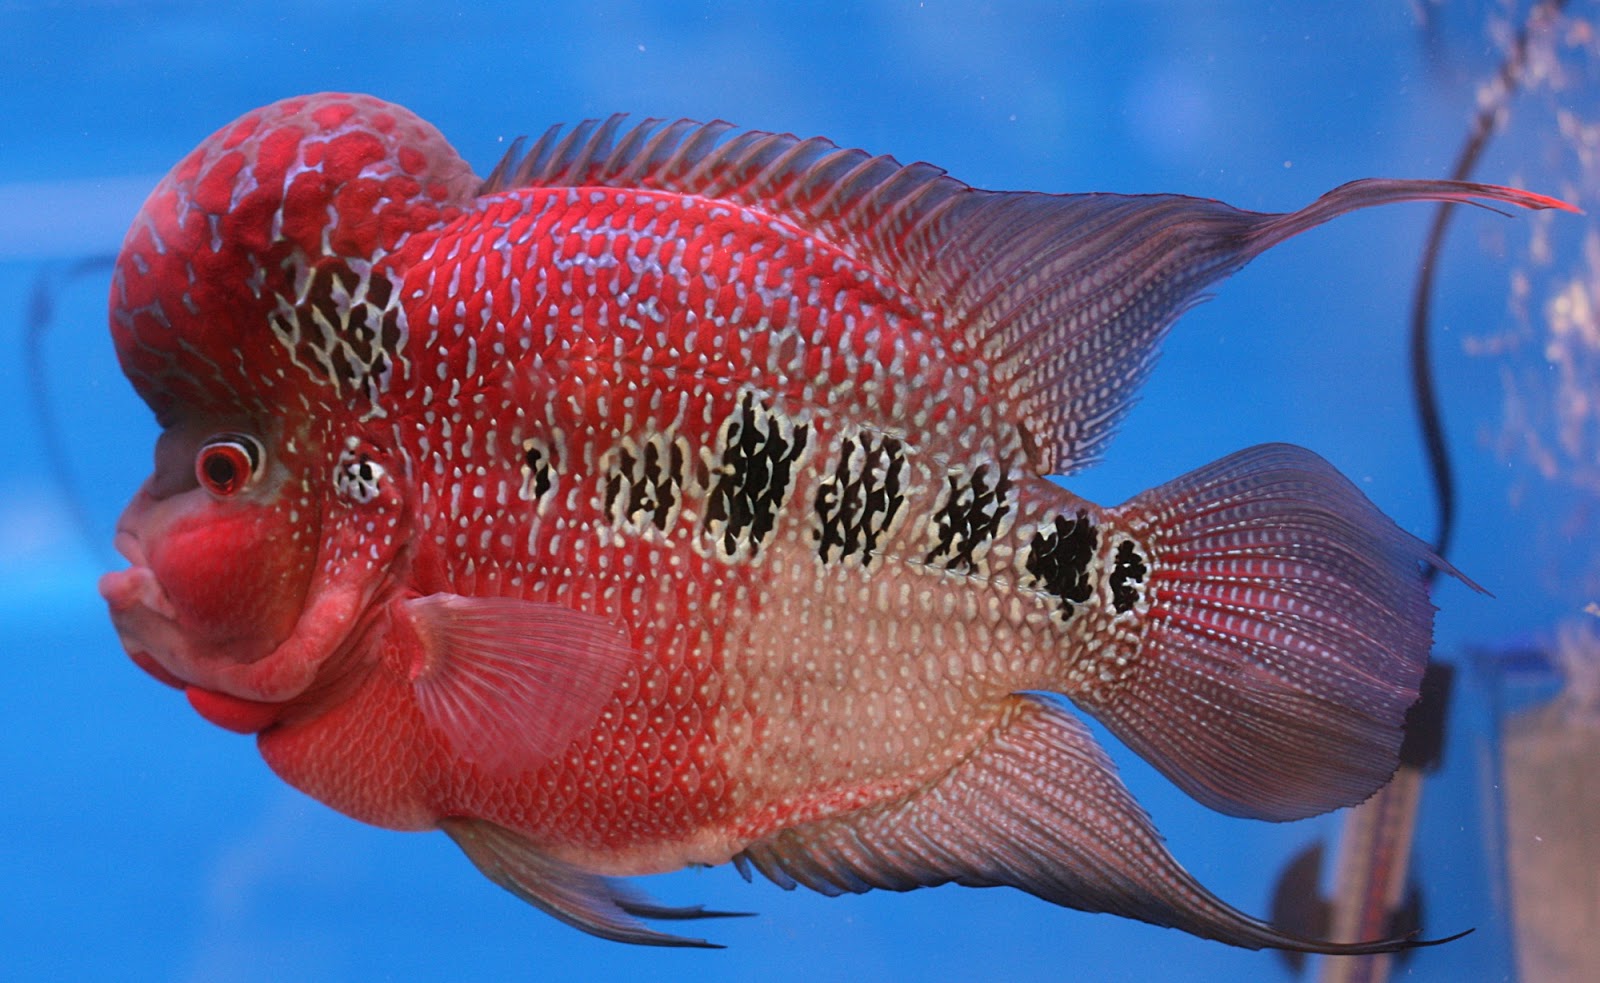 Best Care An Opportunity Of Red Dragon Flowerhorn Meta Content Best Care An Opportunity Of Red Dragon Flowerhorn Dari Blog Flowerhorn Fish Blog By The Title Best Care An Opportunity Of Red Dragon